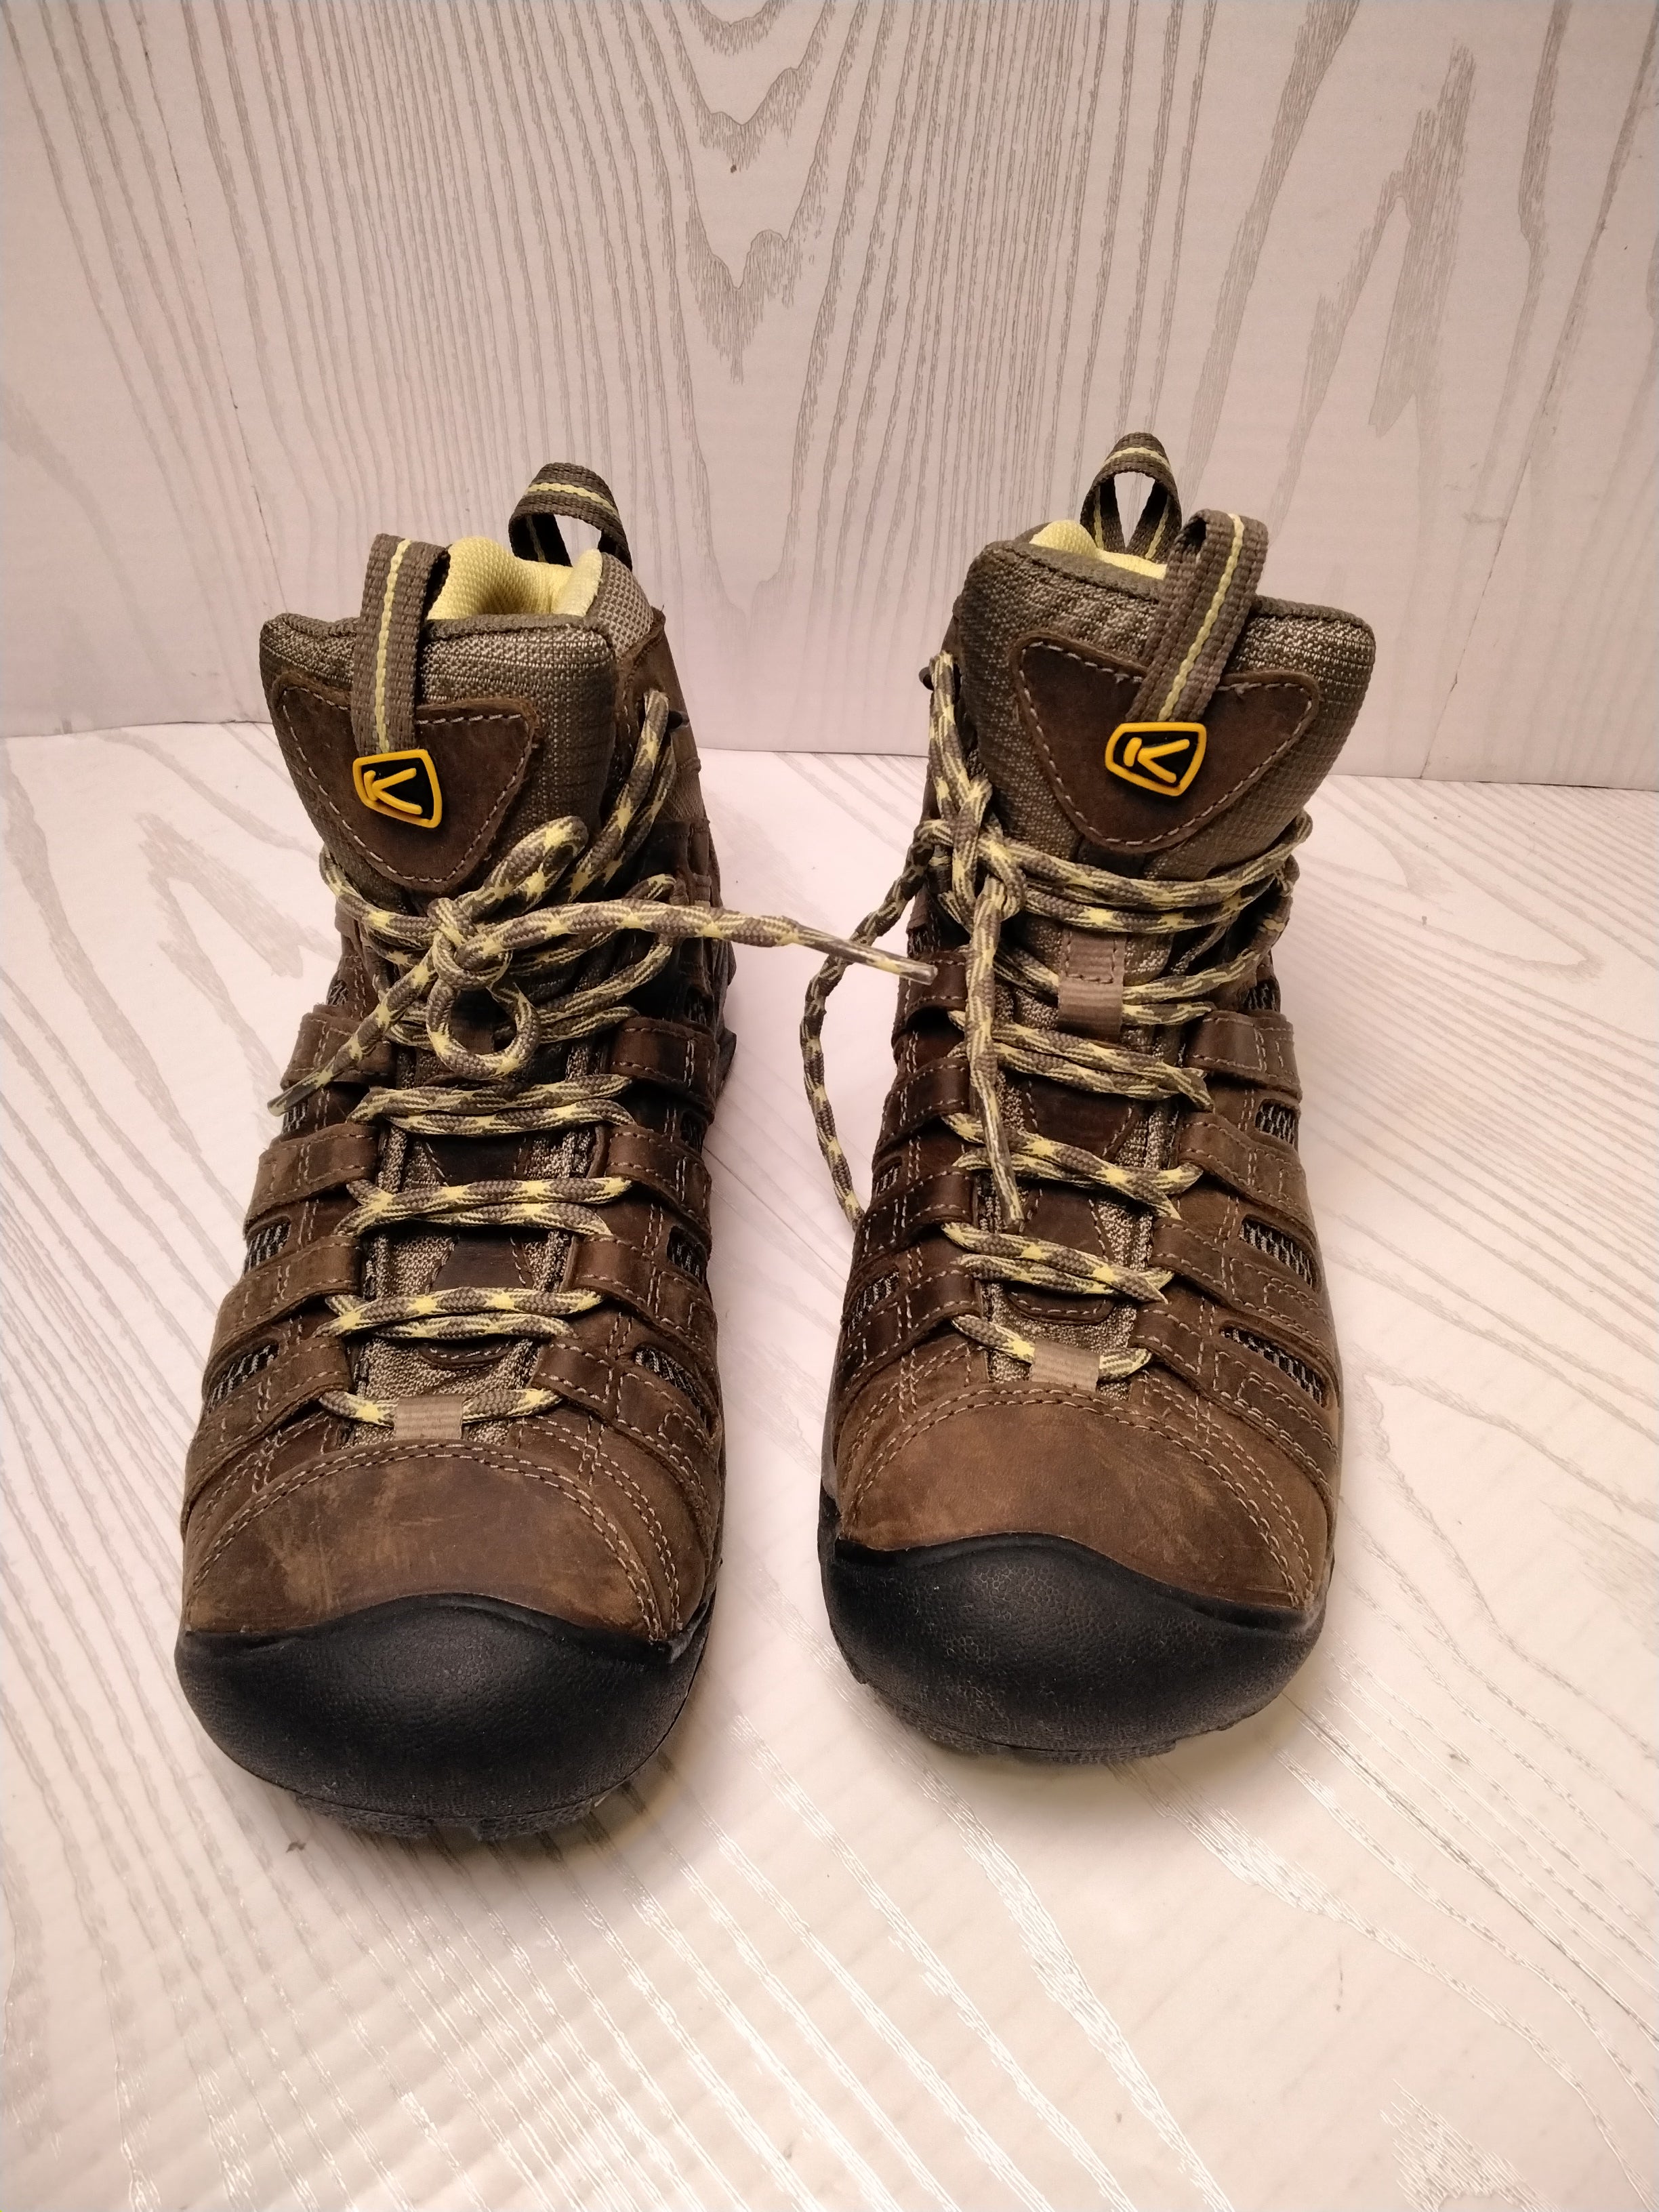 KEEN Women's Voyageur Mid Hiking Boot, Size 8.5 (7774370791662)